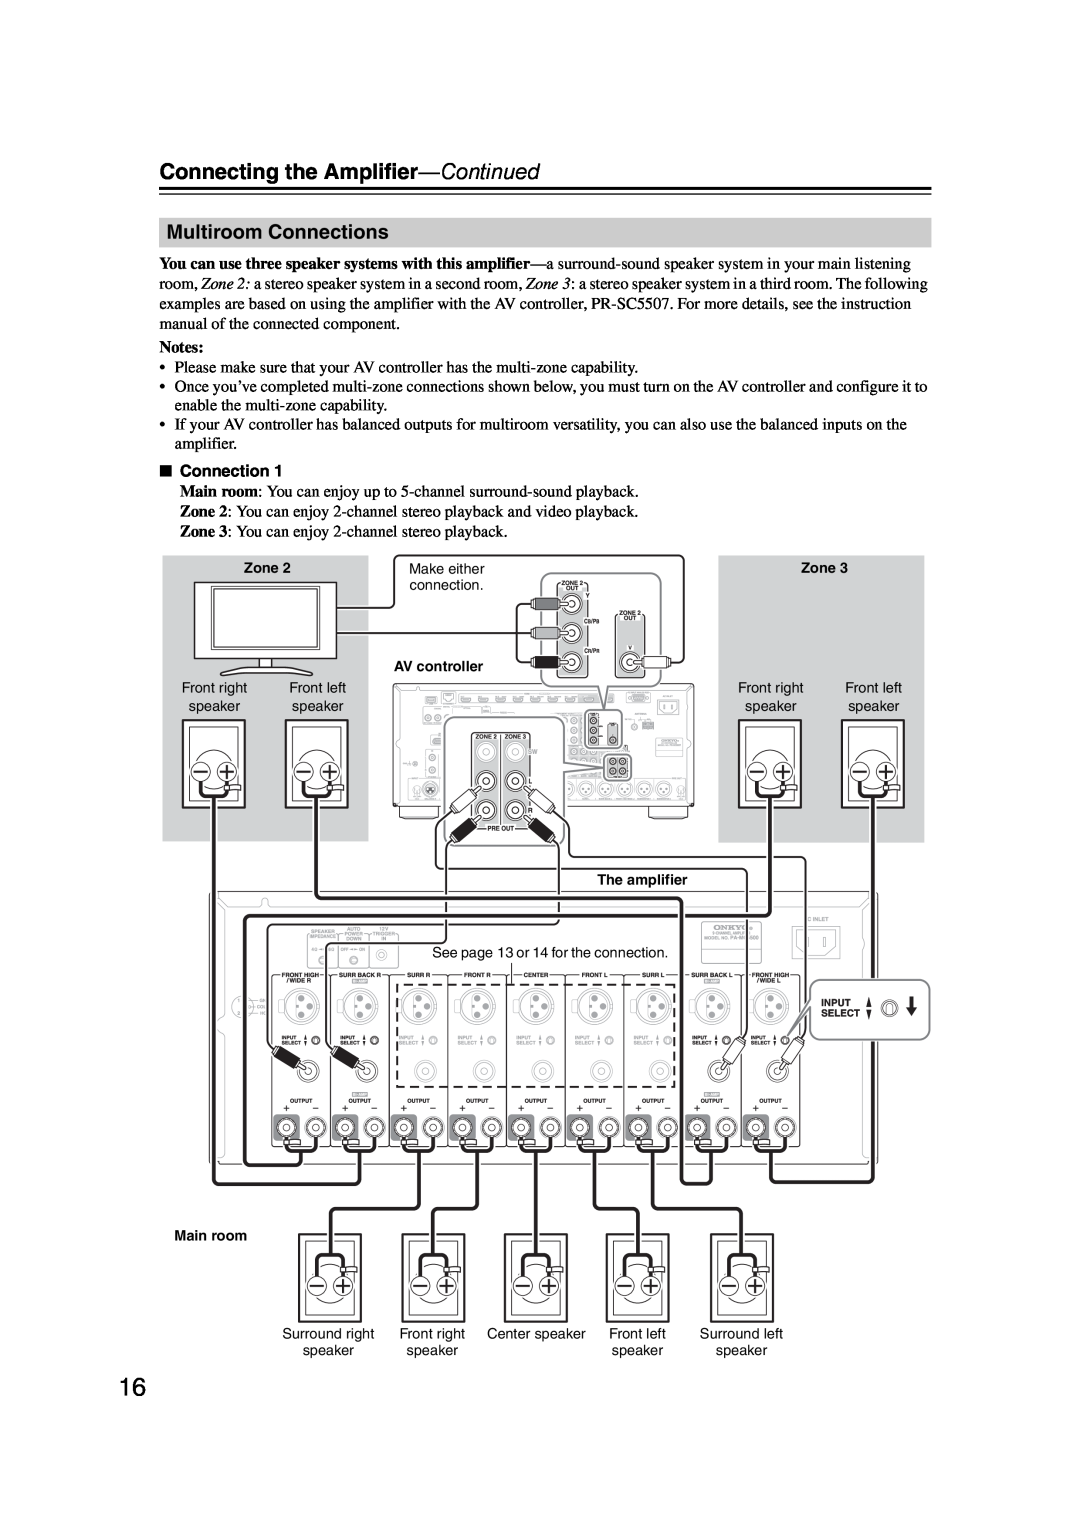 Onkyo PA-MC5500 instruction manual Multiroom Connections, Connecting the Amplifier-Continued 